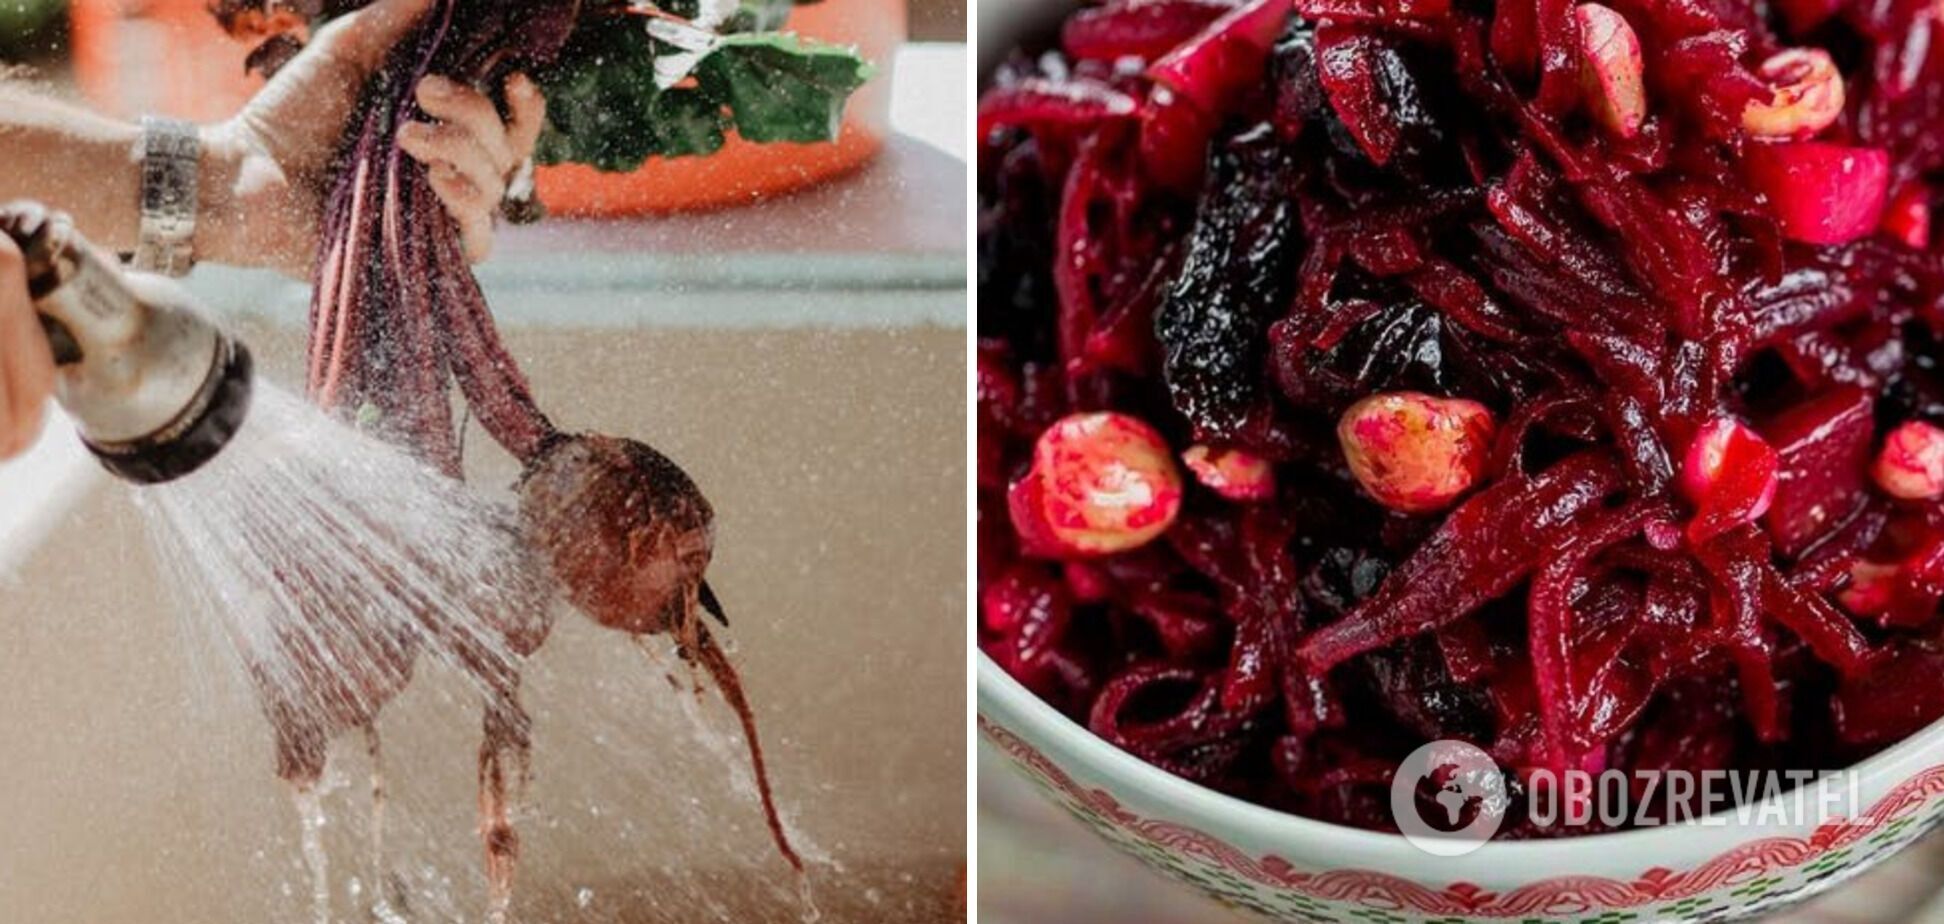 Recipes from beets